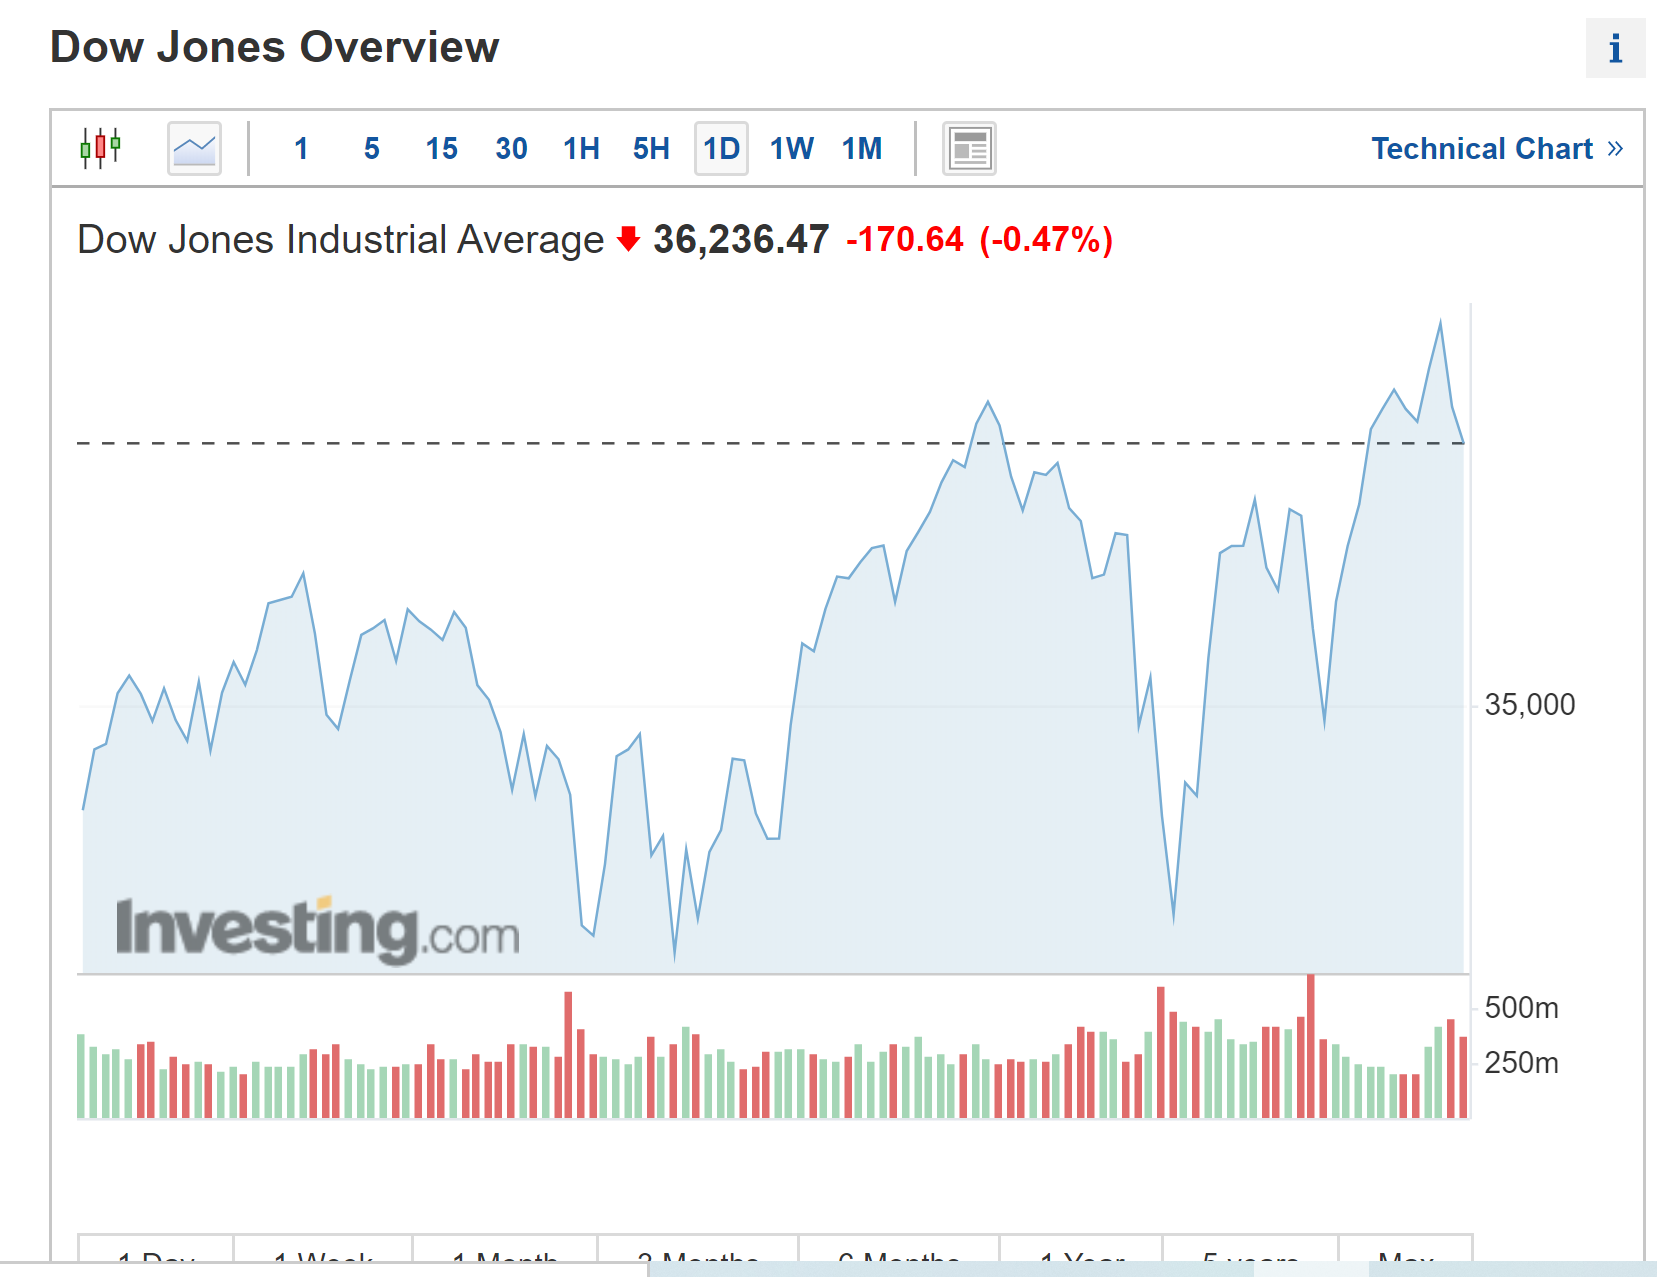 Dow Jones Industrial Average (DJIA) - Share Index In The USA